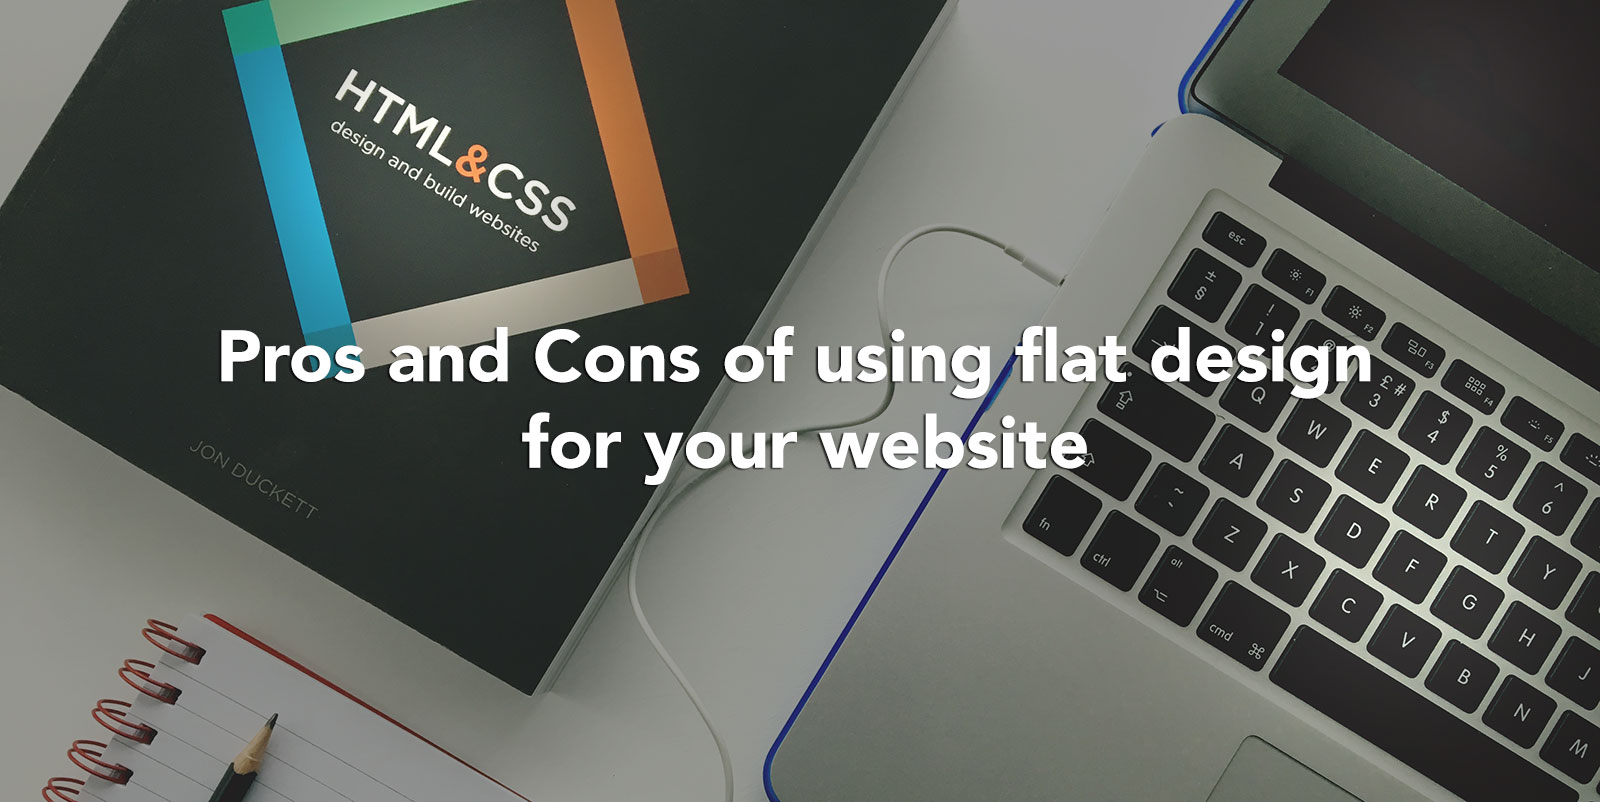 Pros and Cons of using flat design for your website